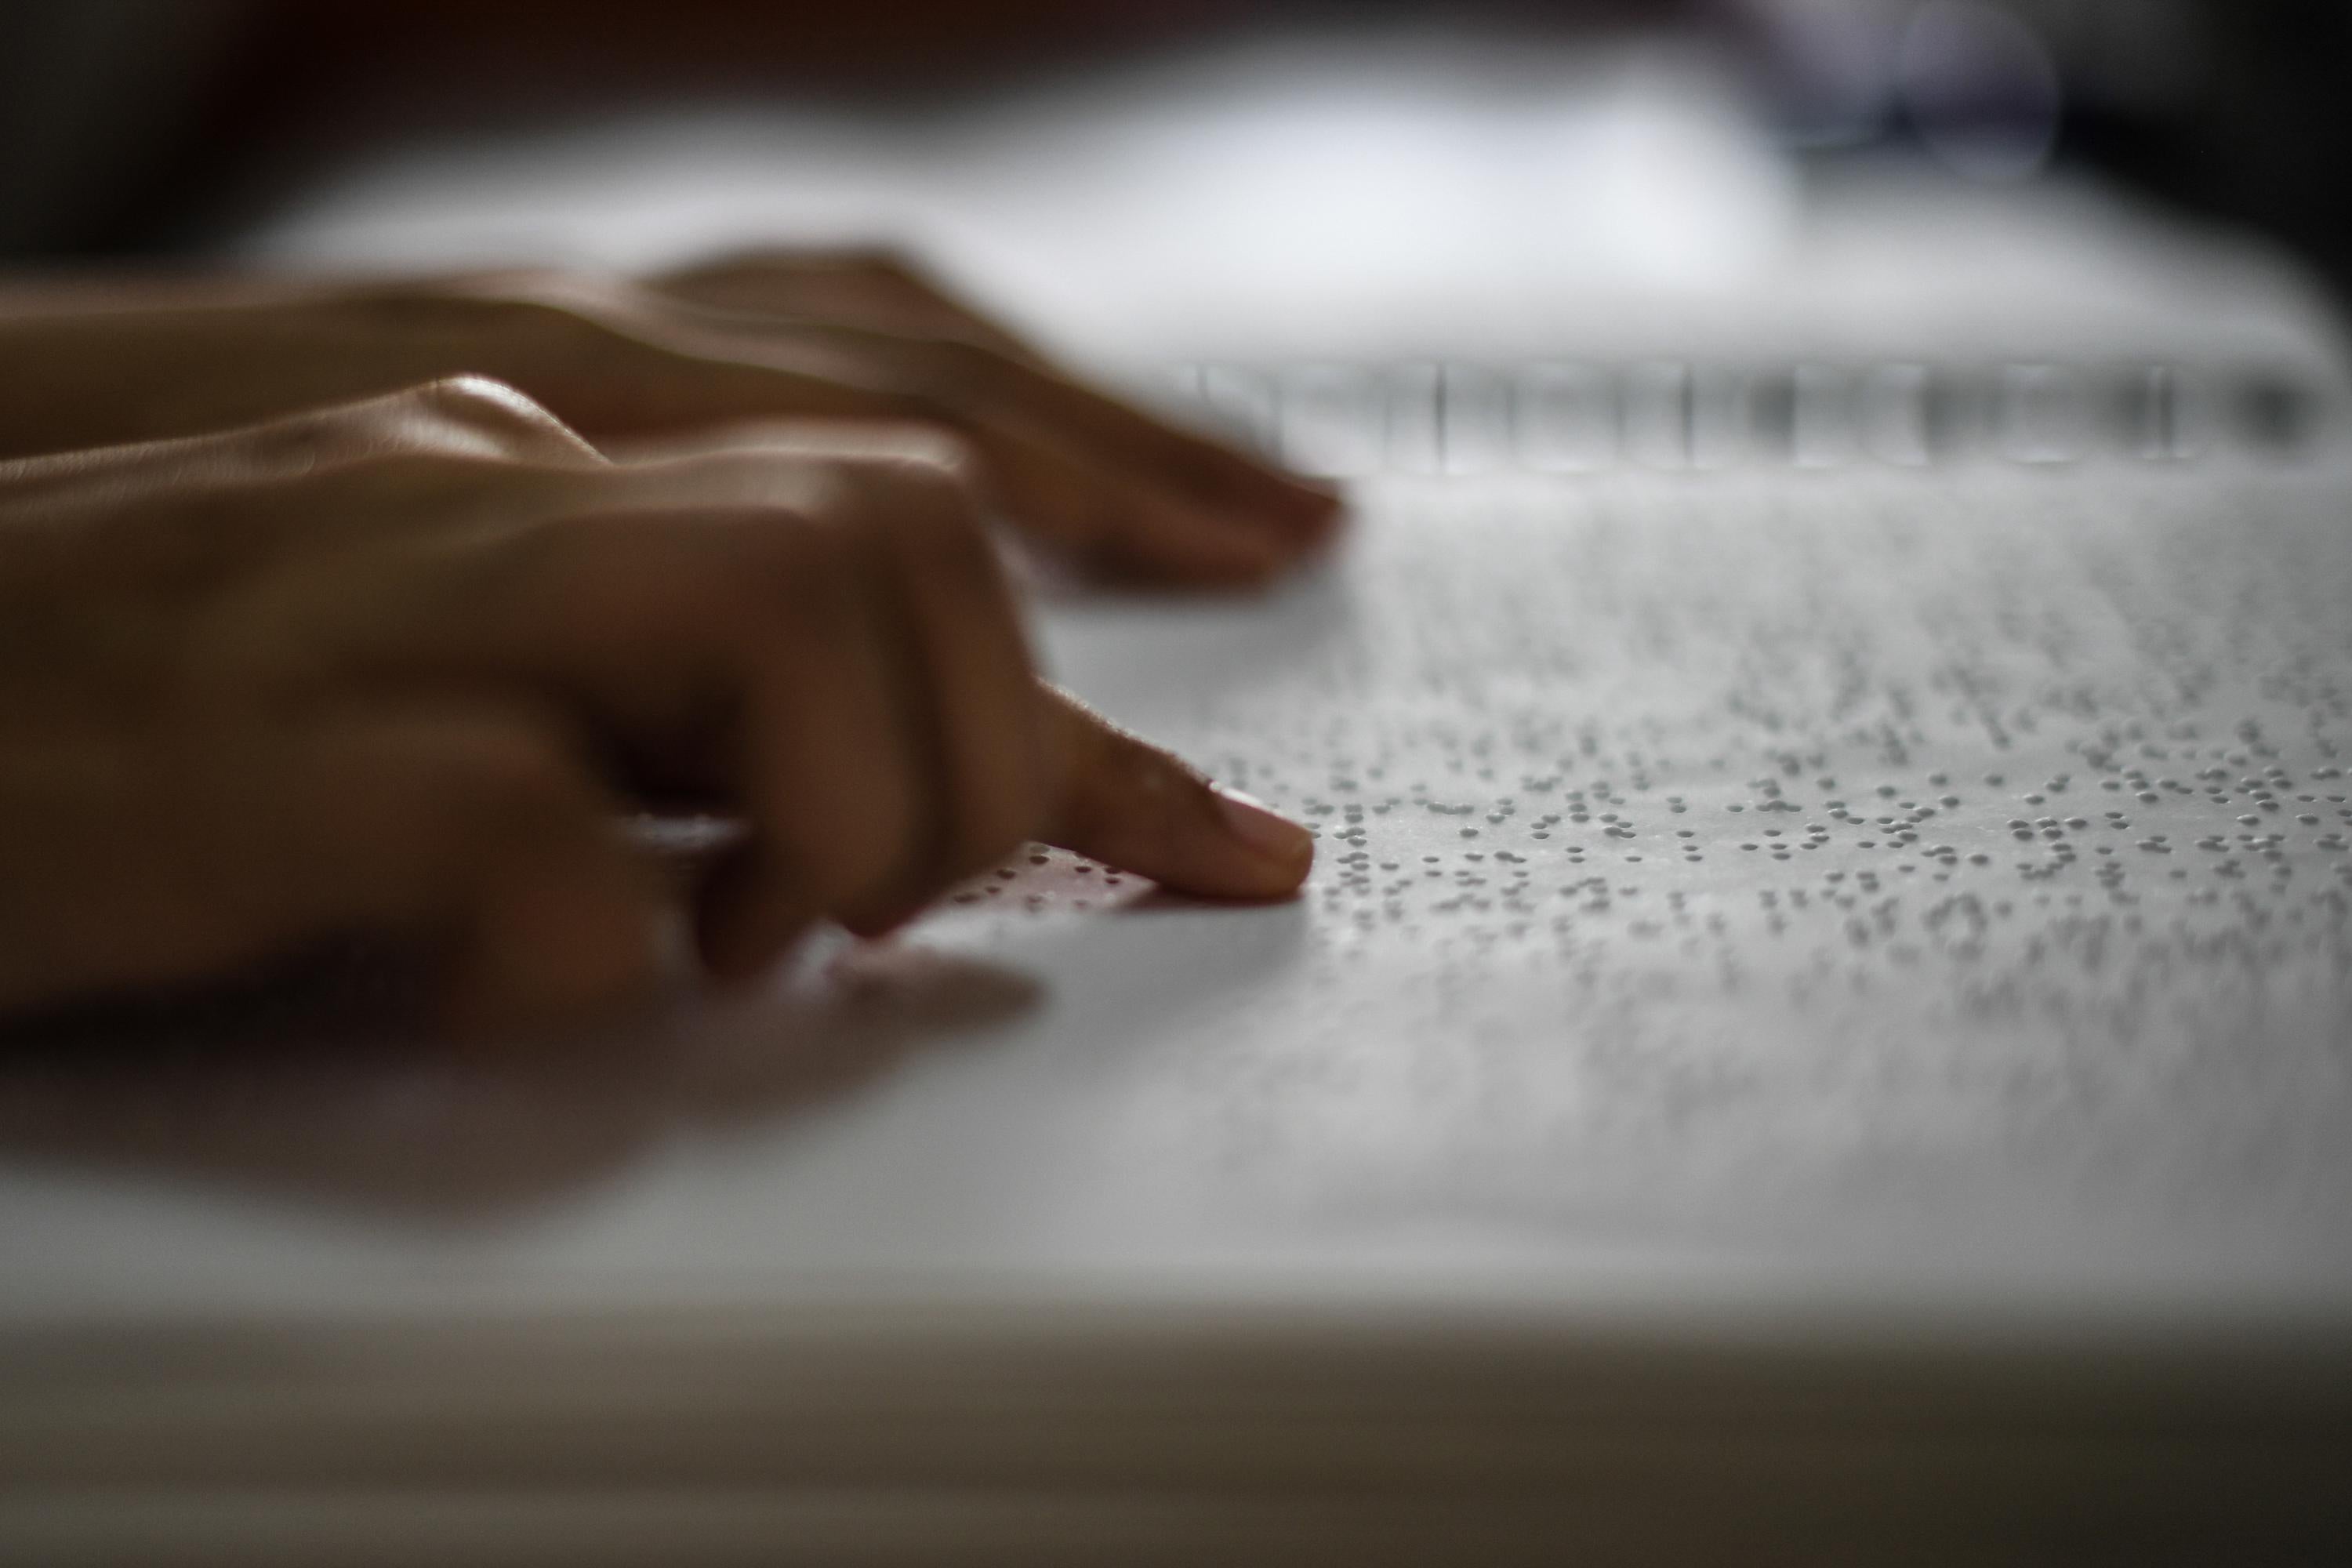 A visually impaired person reads a page in Braille.